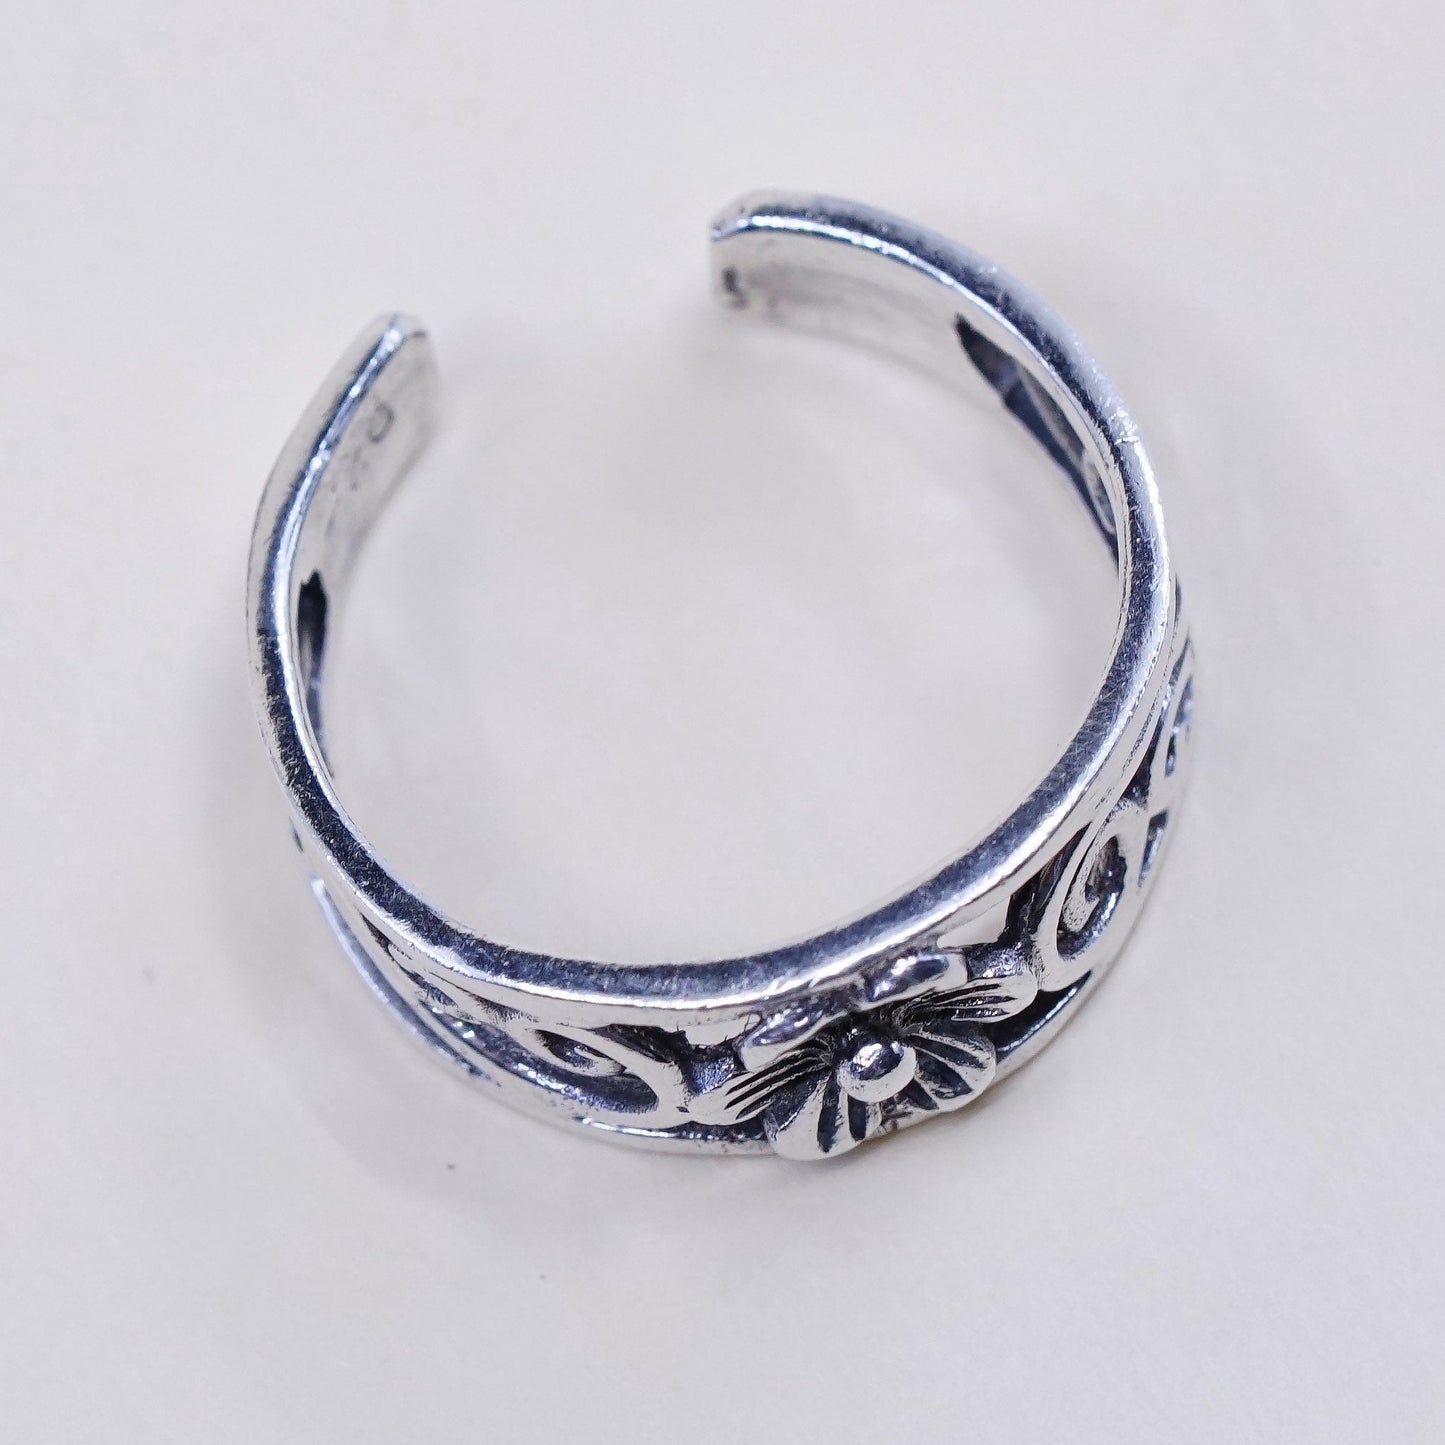 Size 5.75, vintage Sterling silver handmade ring, 925 filigree band with flower